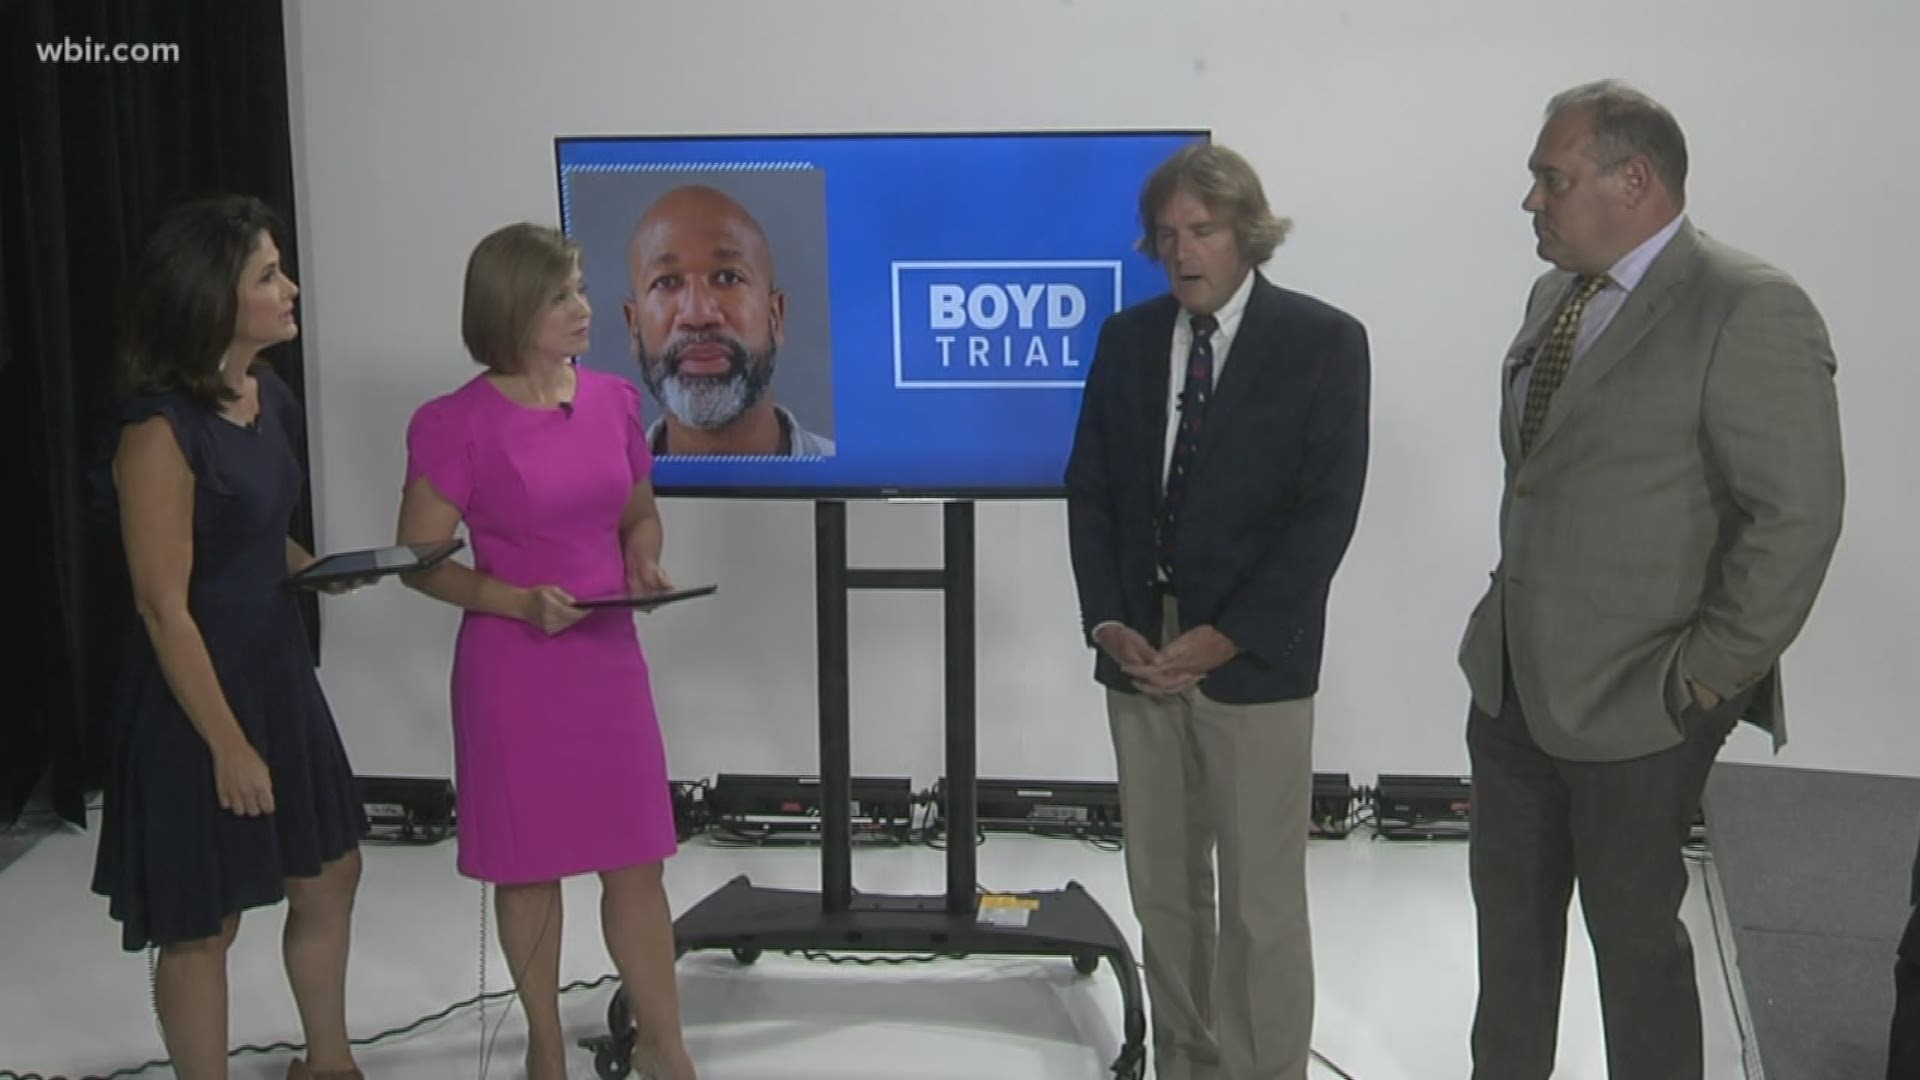 He believes the defense was right to "ride" the State's lack of forensic evidence on Boyd.